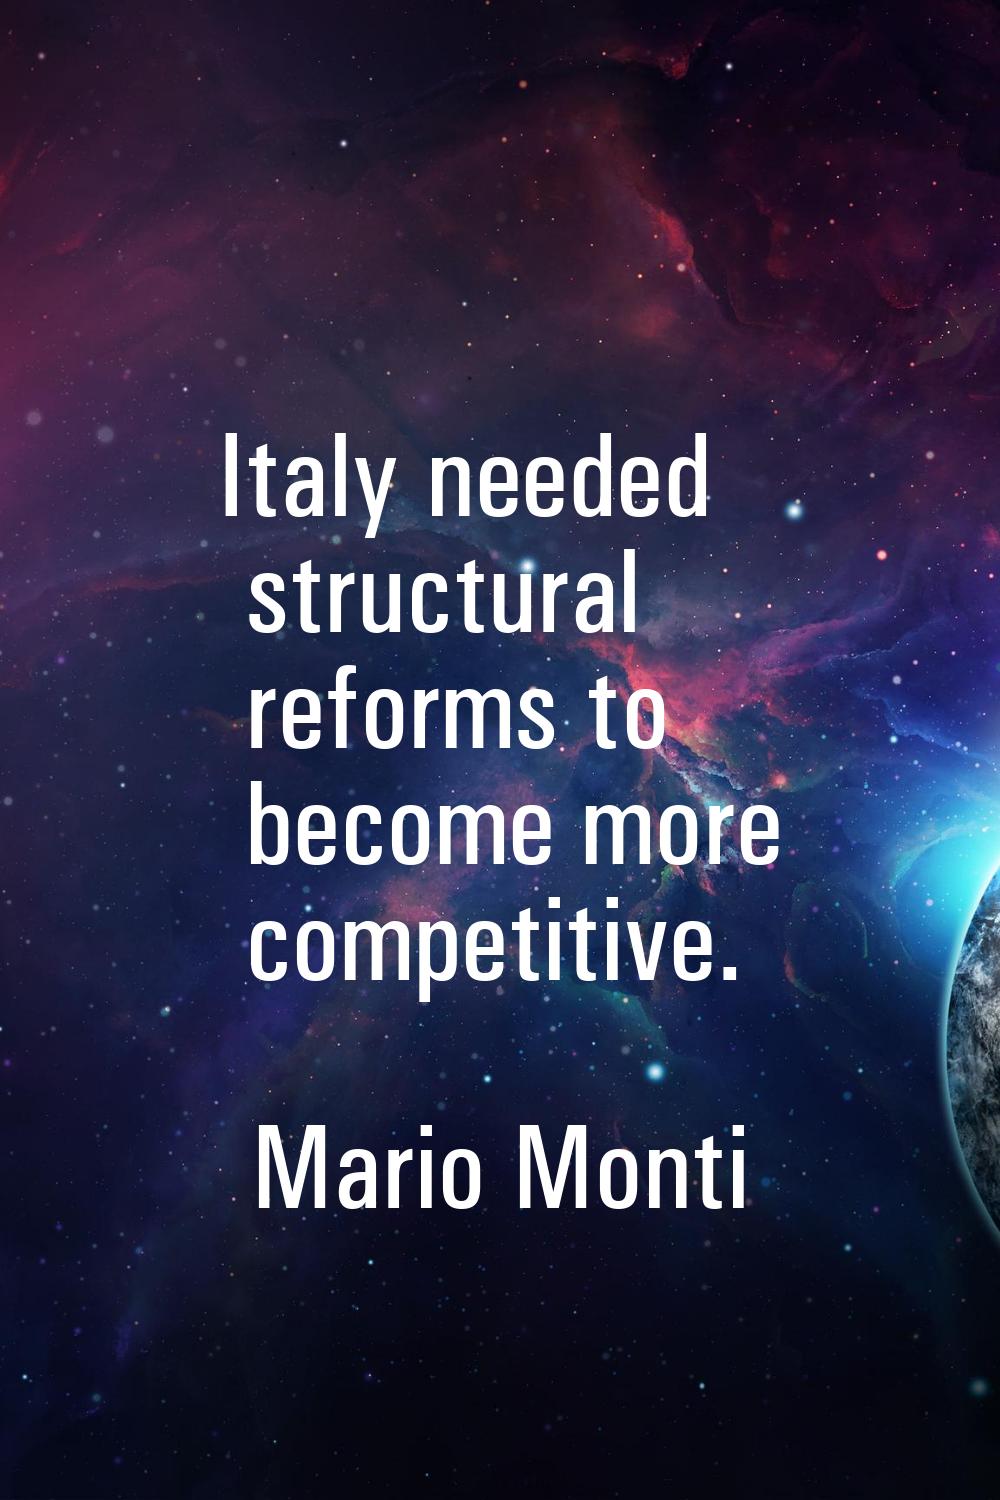 Italy needed structural reforms to become more competitive.